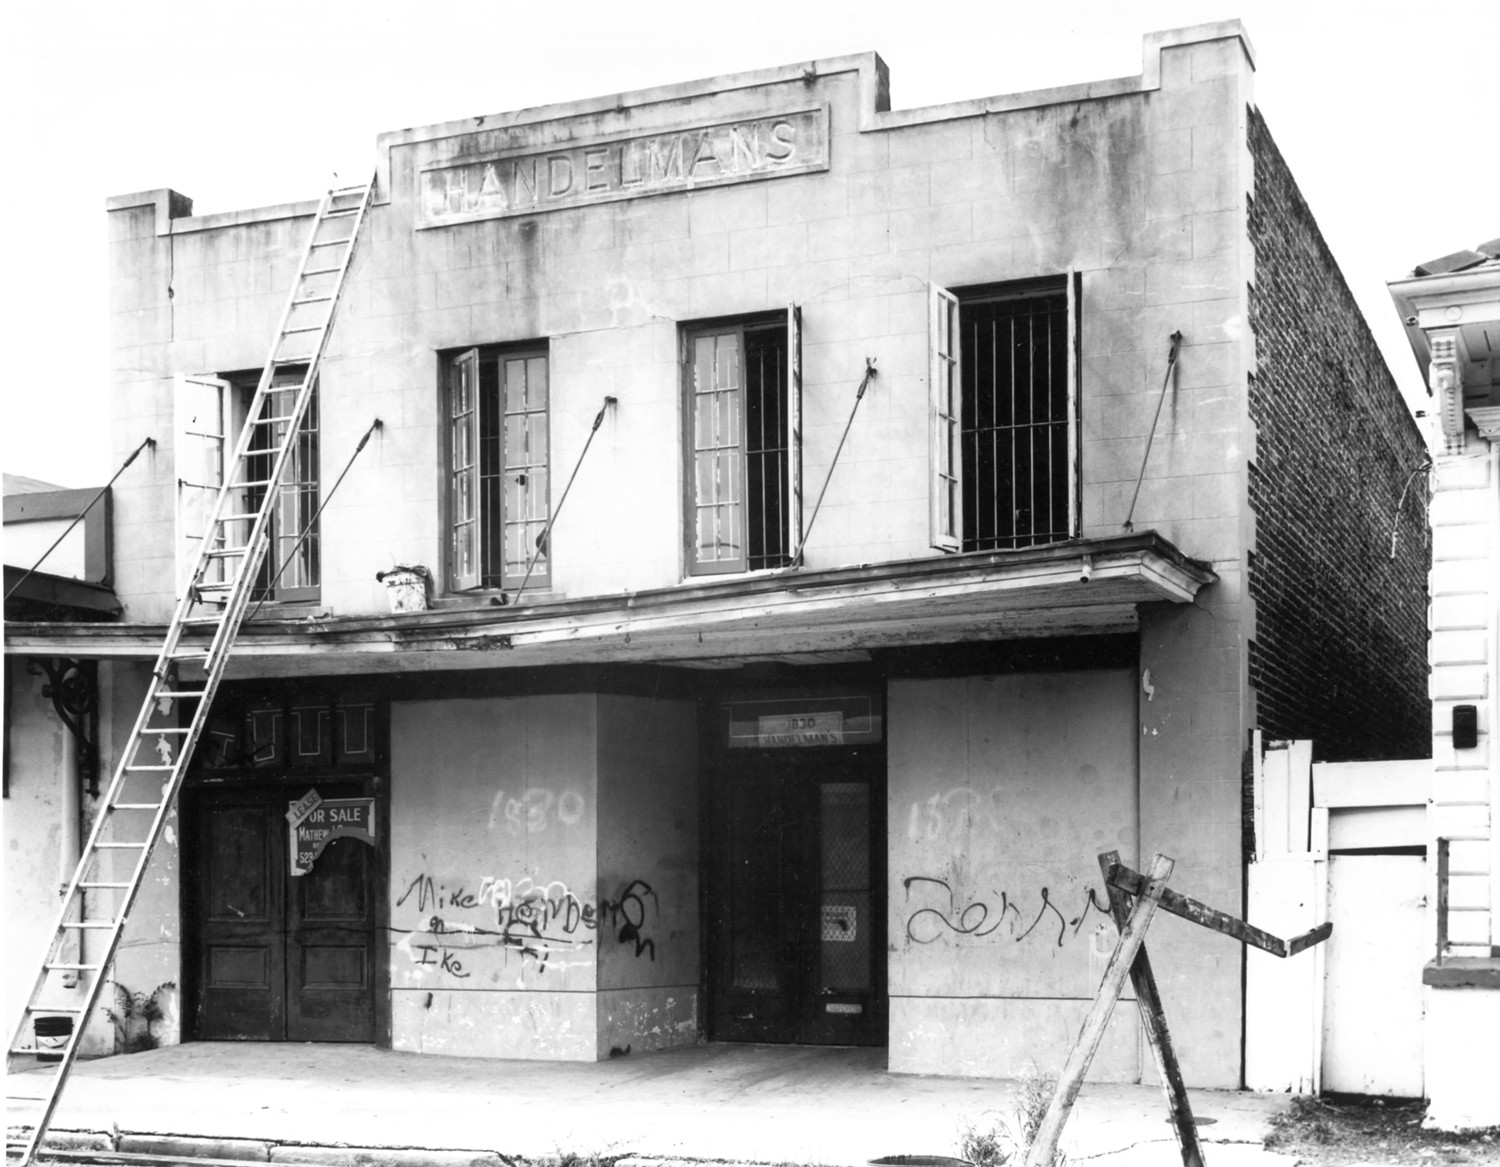 Old Handleman Building, New Orleans Louisiana View of side entrance (1979)